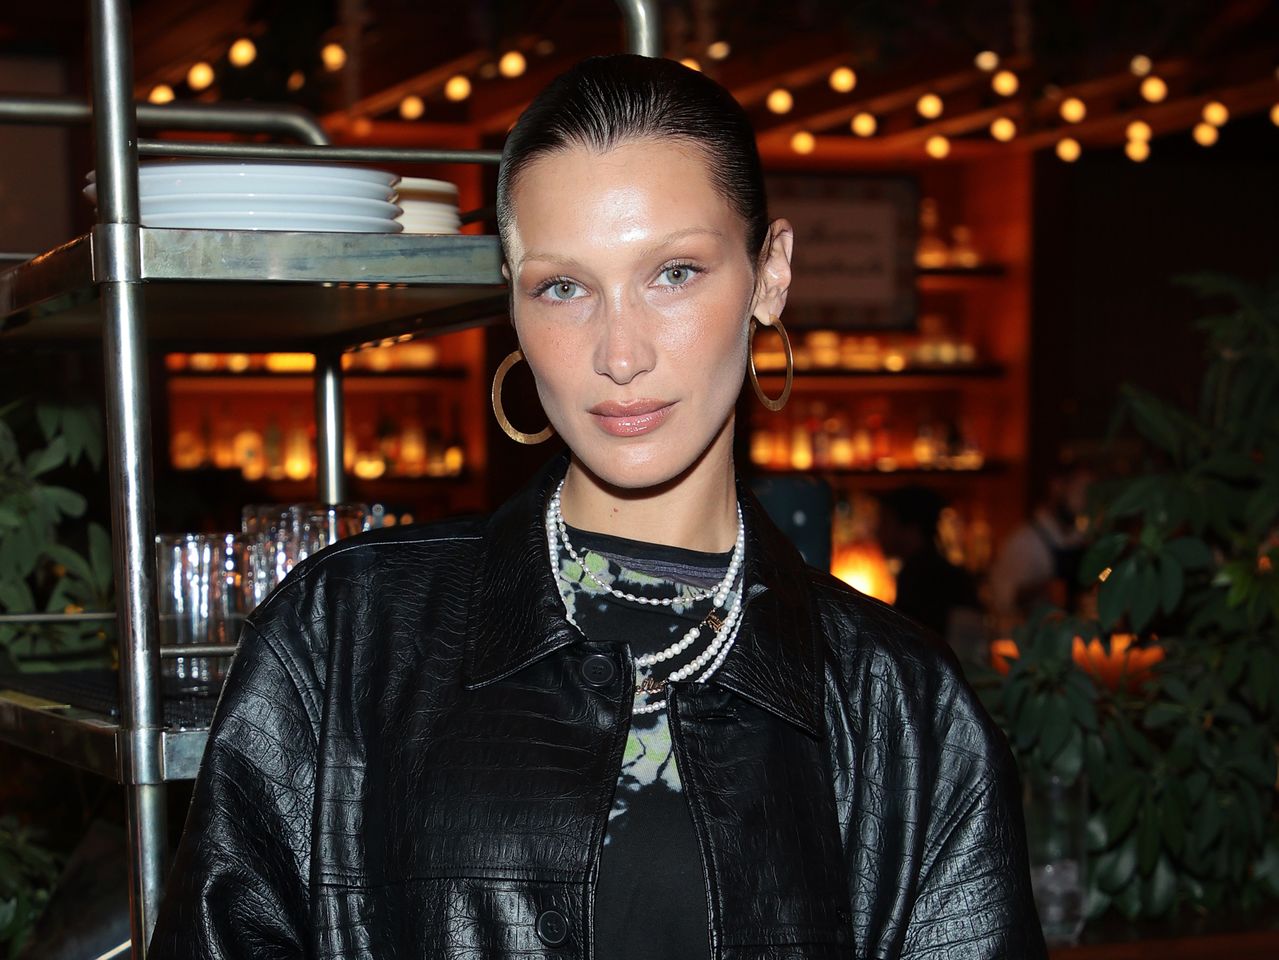 Bella Hadid claims she lost friends, jobs over anti-Israel stance